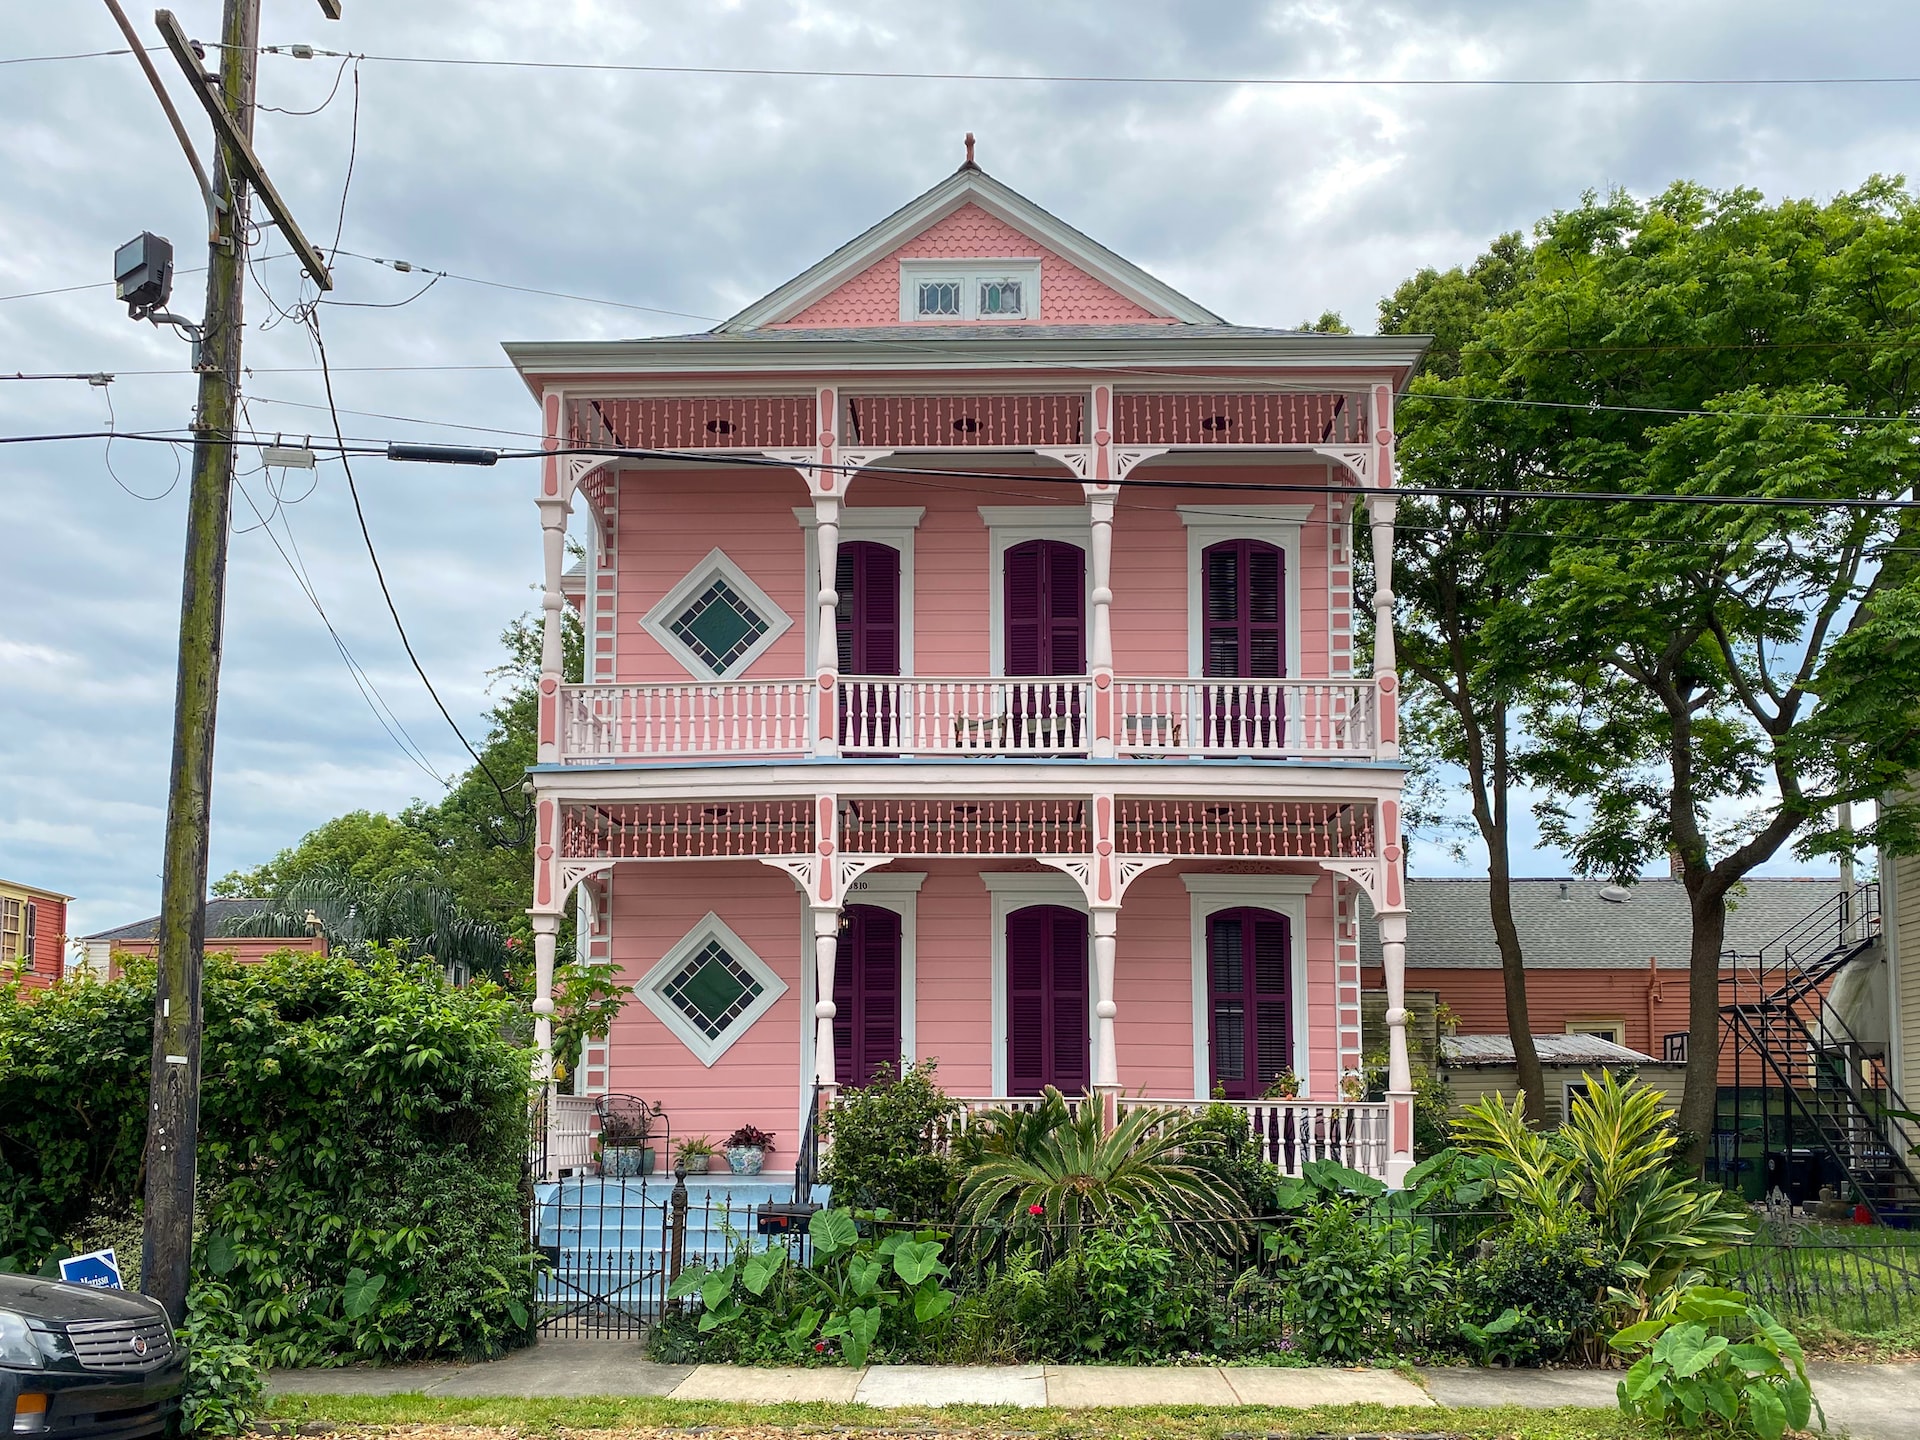 A pink two-story house in New Orleans.